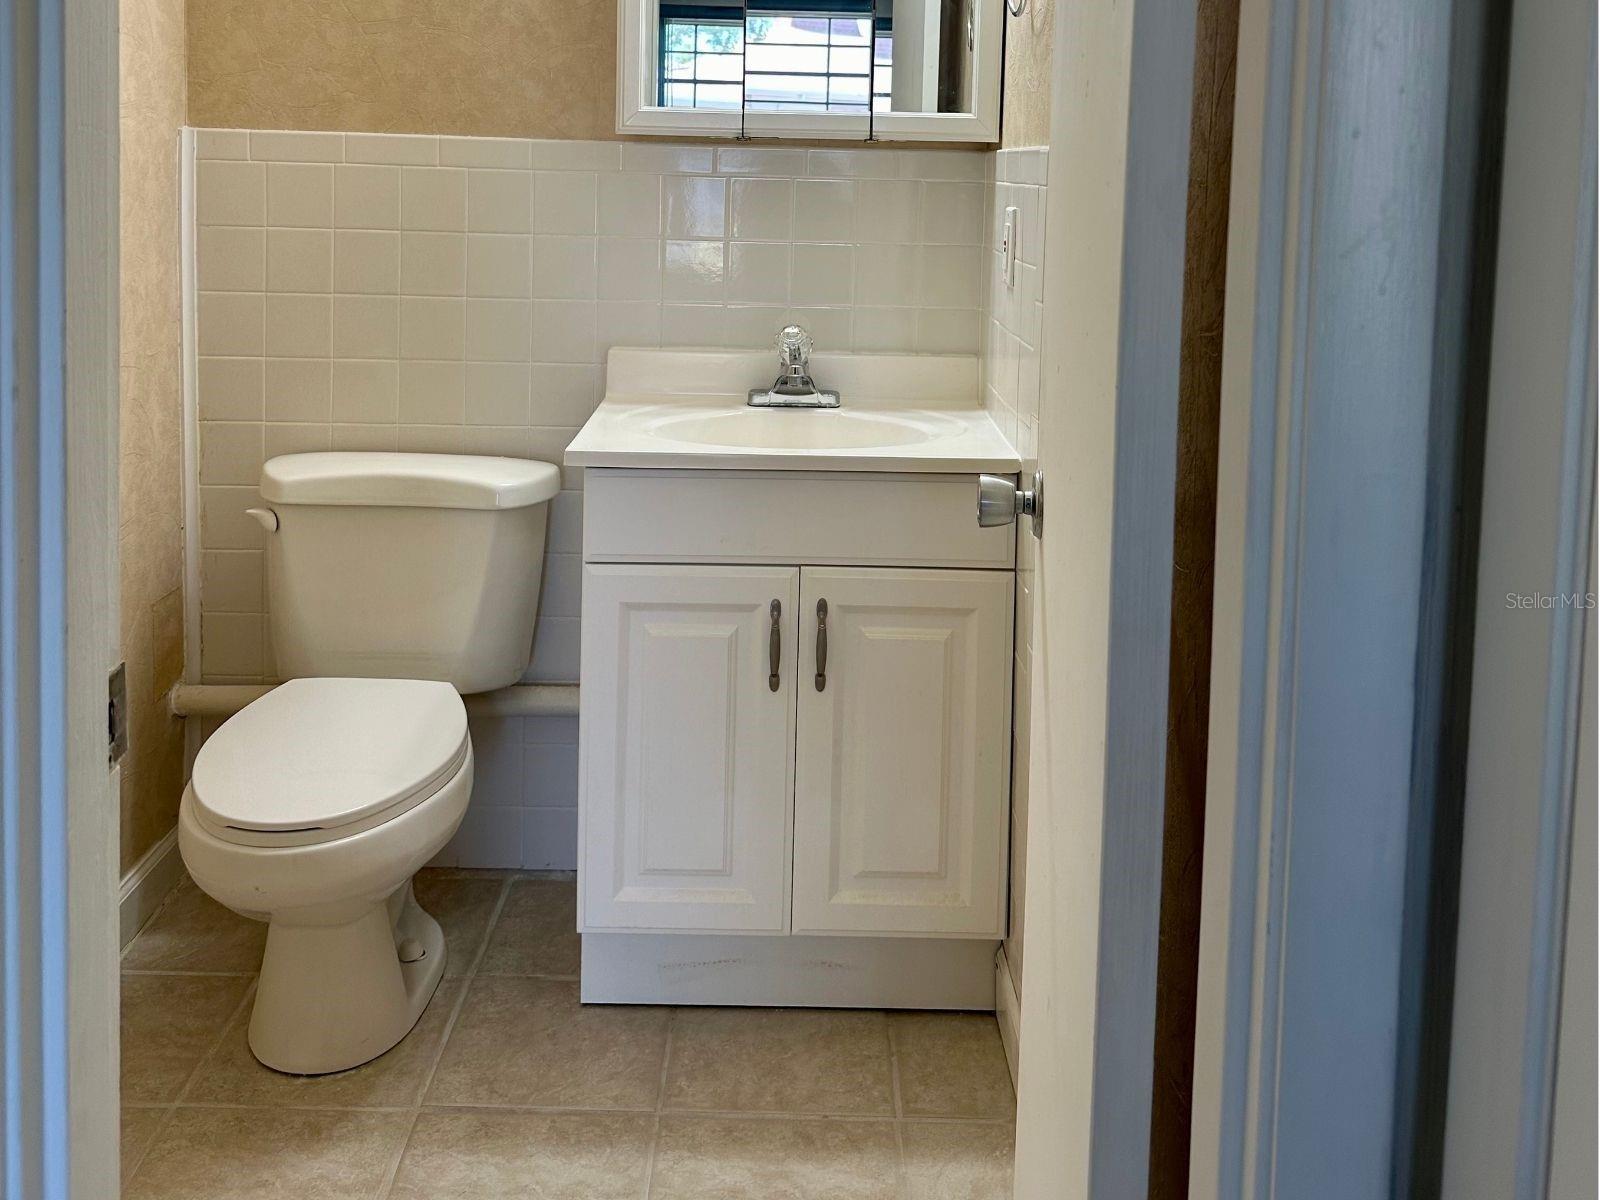 Effortless elegance awaits! Discover a half bath conveniently nestled within the primary bedroom for added comfort and privacy.